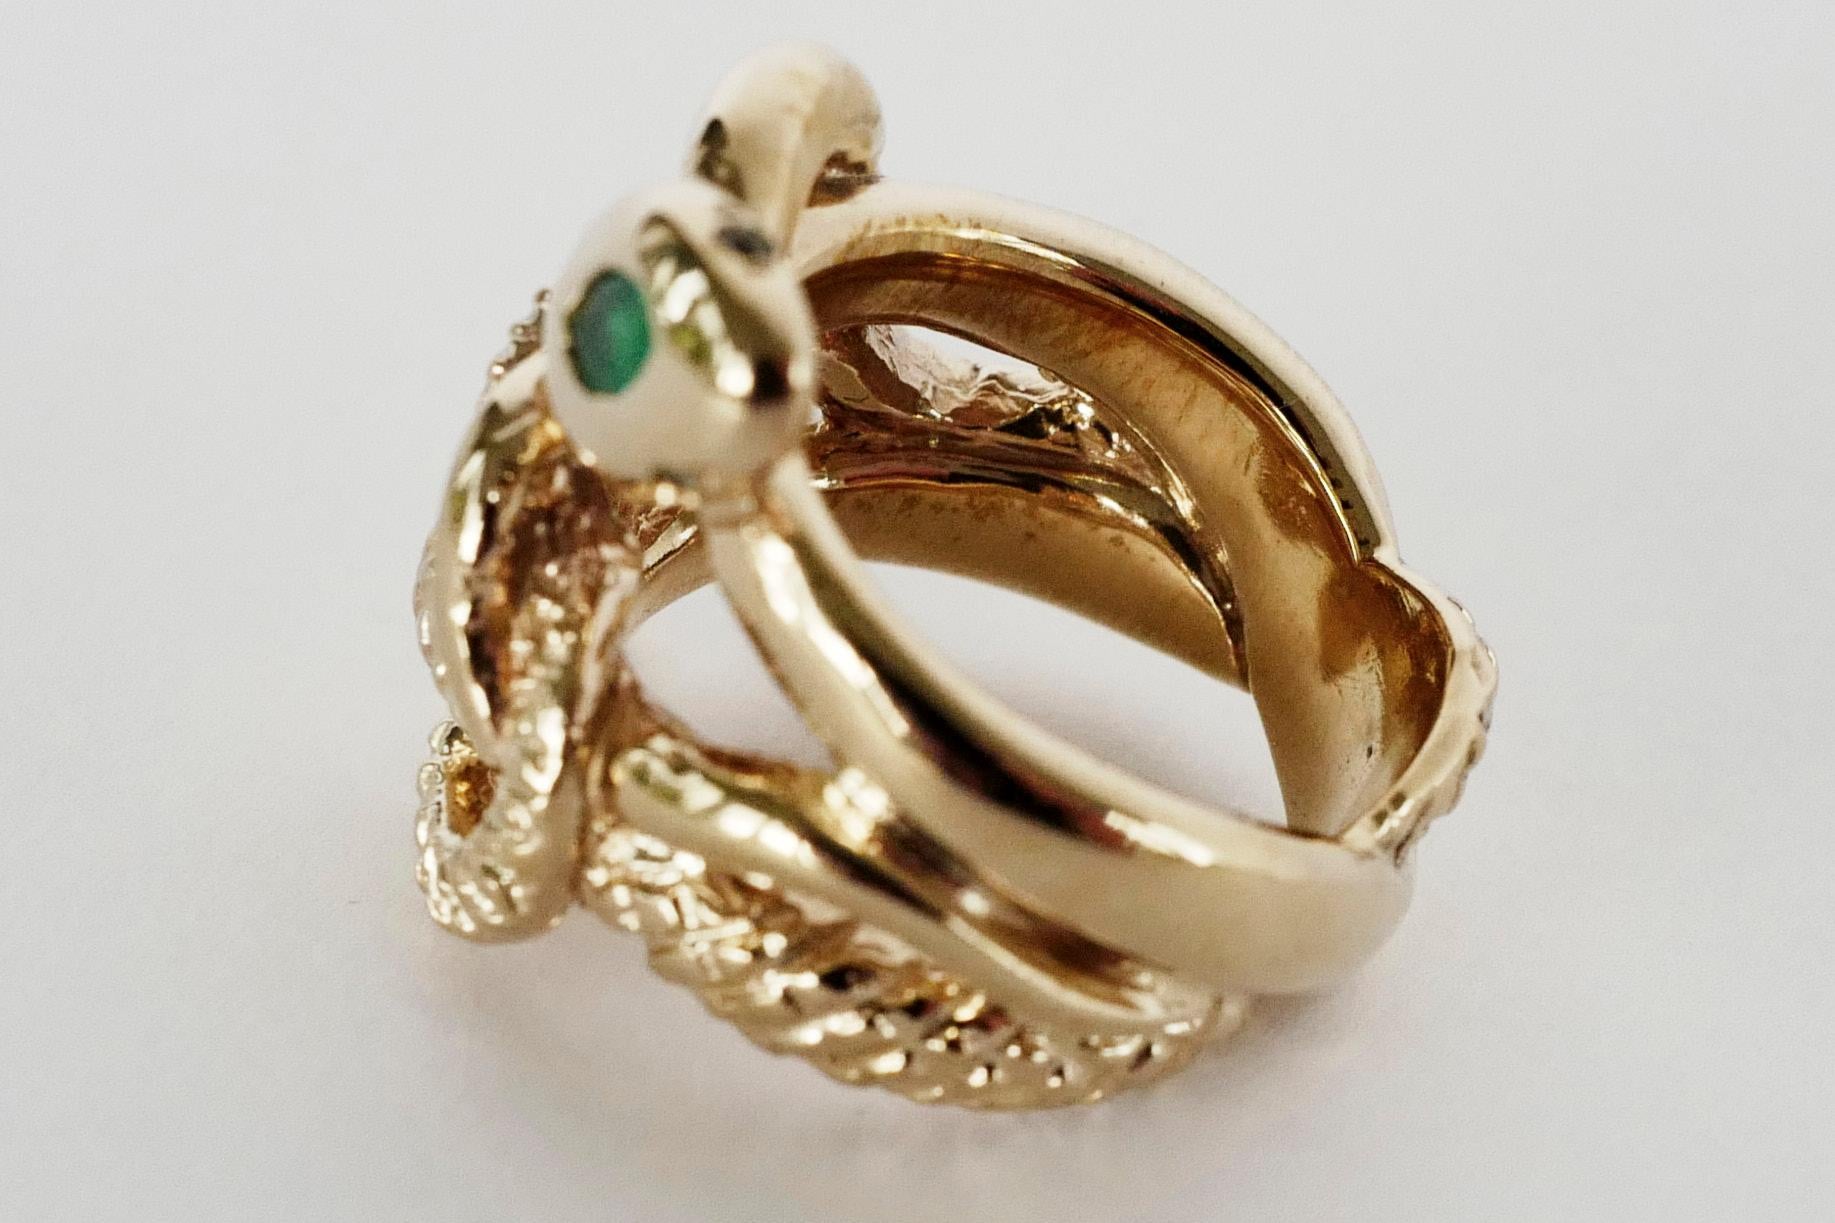 Emerald White Diamond Snake Ring Ruby Eyes Bronze Victorian Style J Dauphin For Sale 2